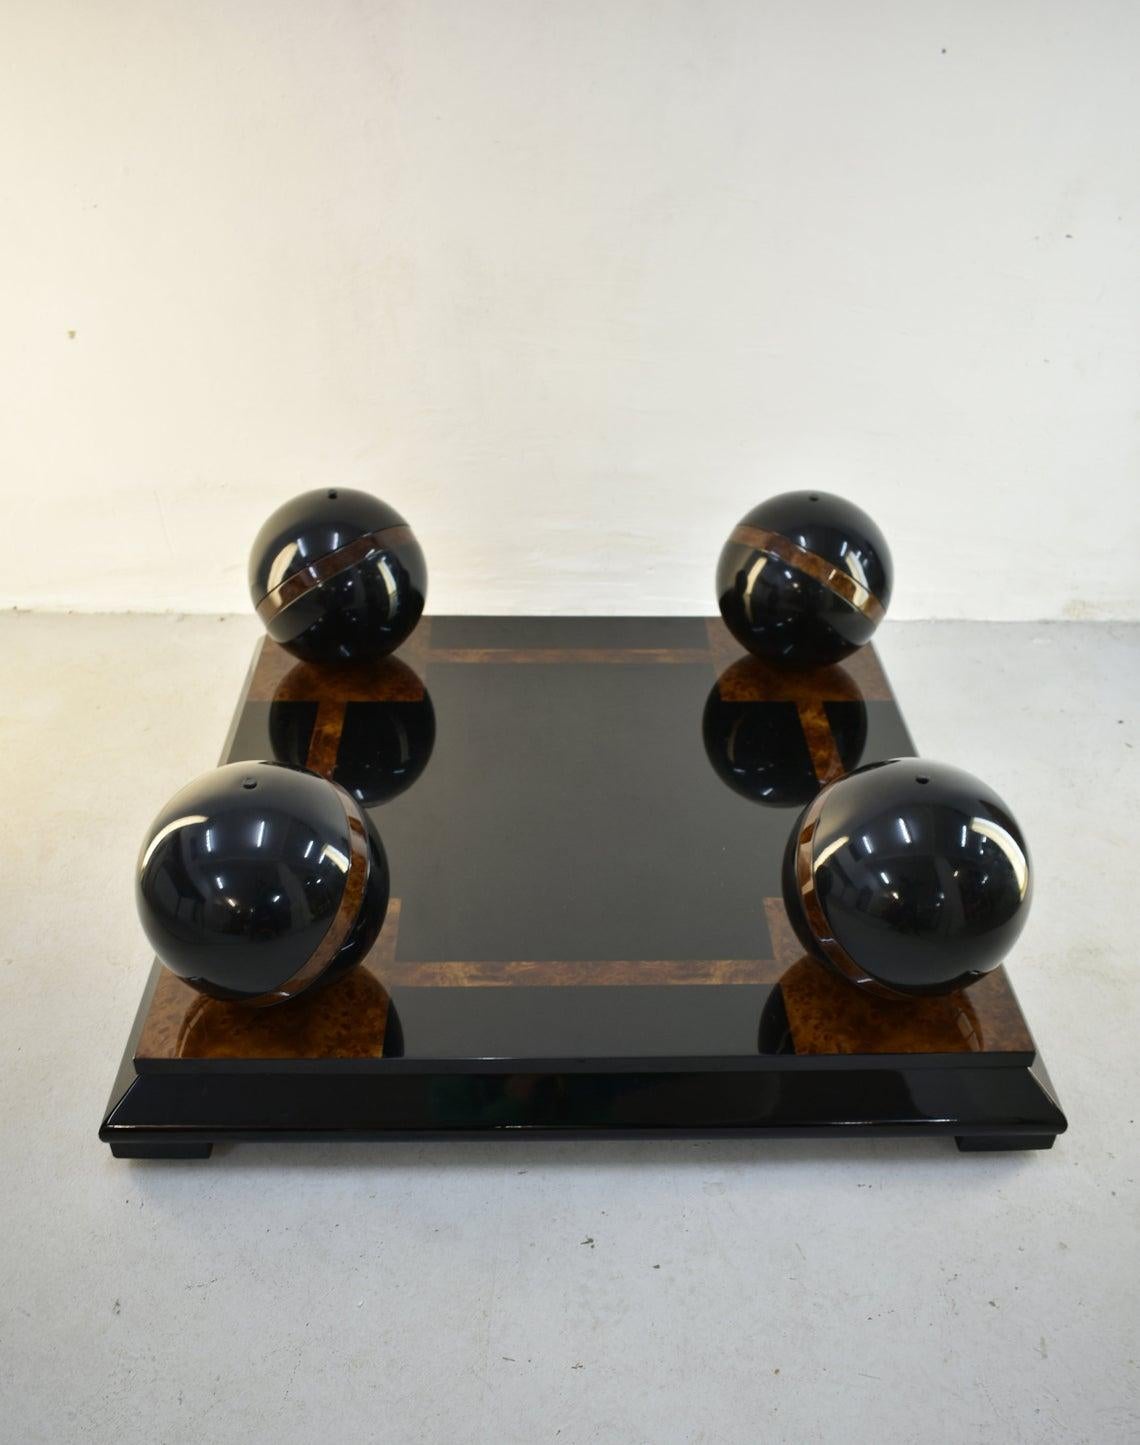 Stunning luxury Italian coffee table from 1970s

Base is made of black lacquered wood with details in burl wood

Base has casters, 4 large spheres are made of black metal with burl wood details

Large glass top stands freely on 4